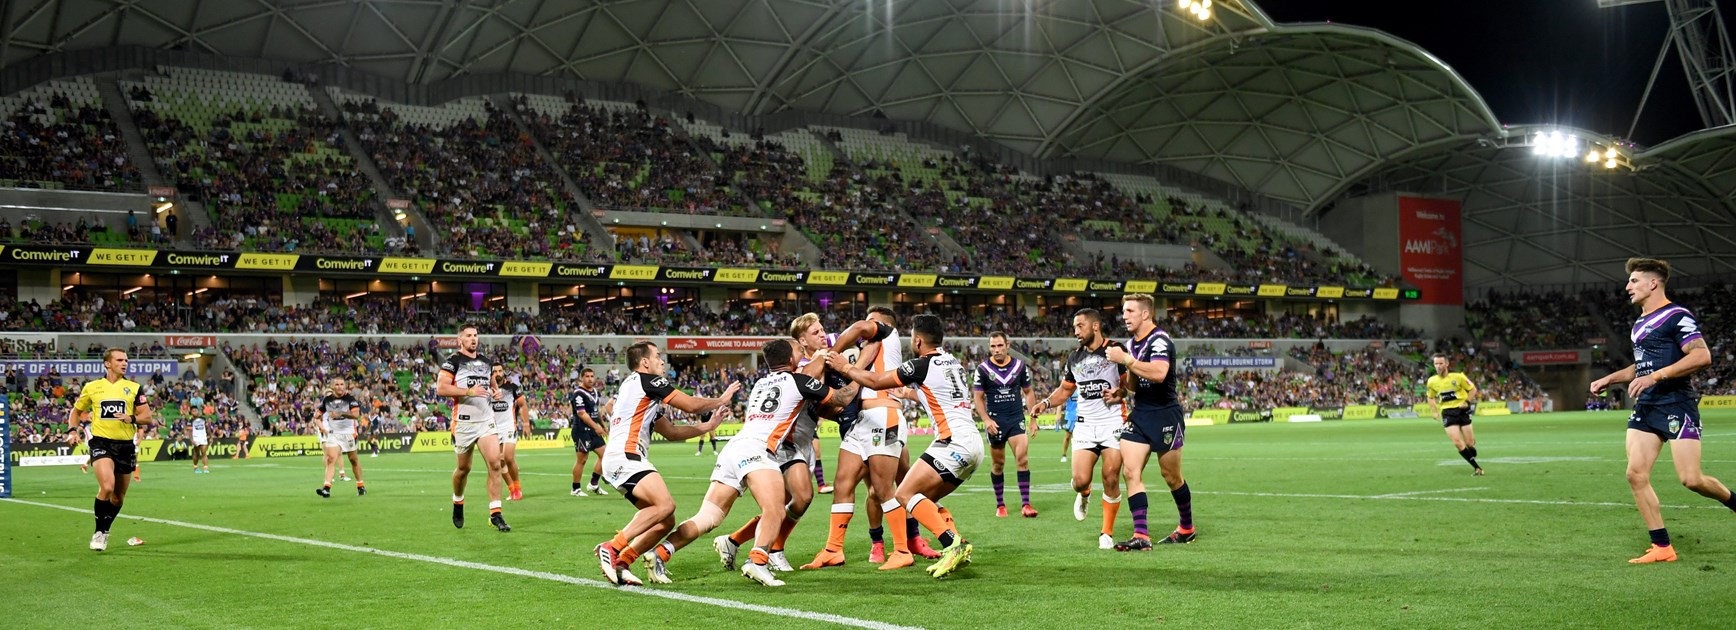 Watch Wests Tigers take on the Storm in style!